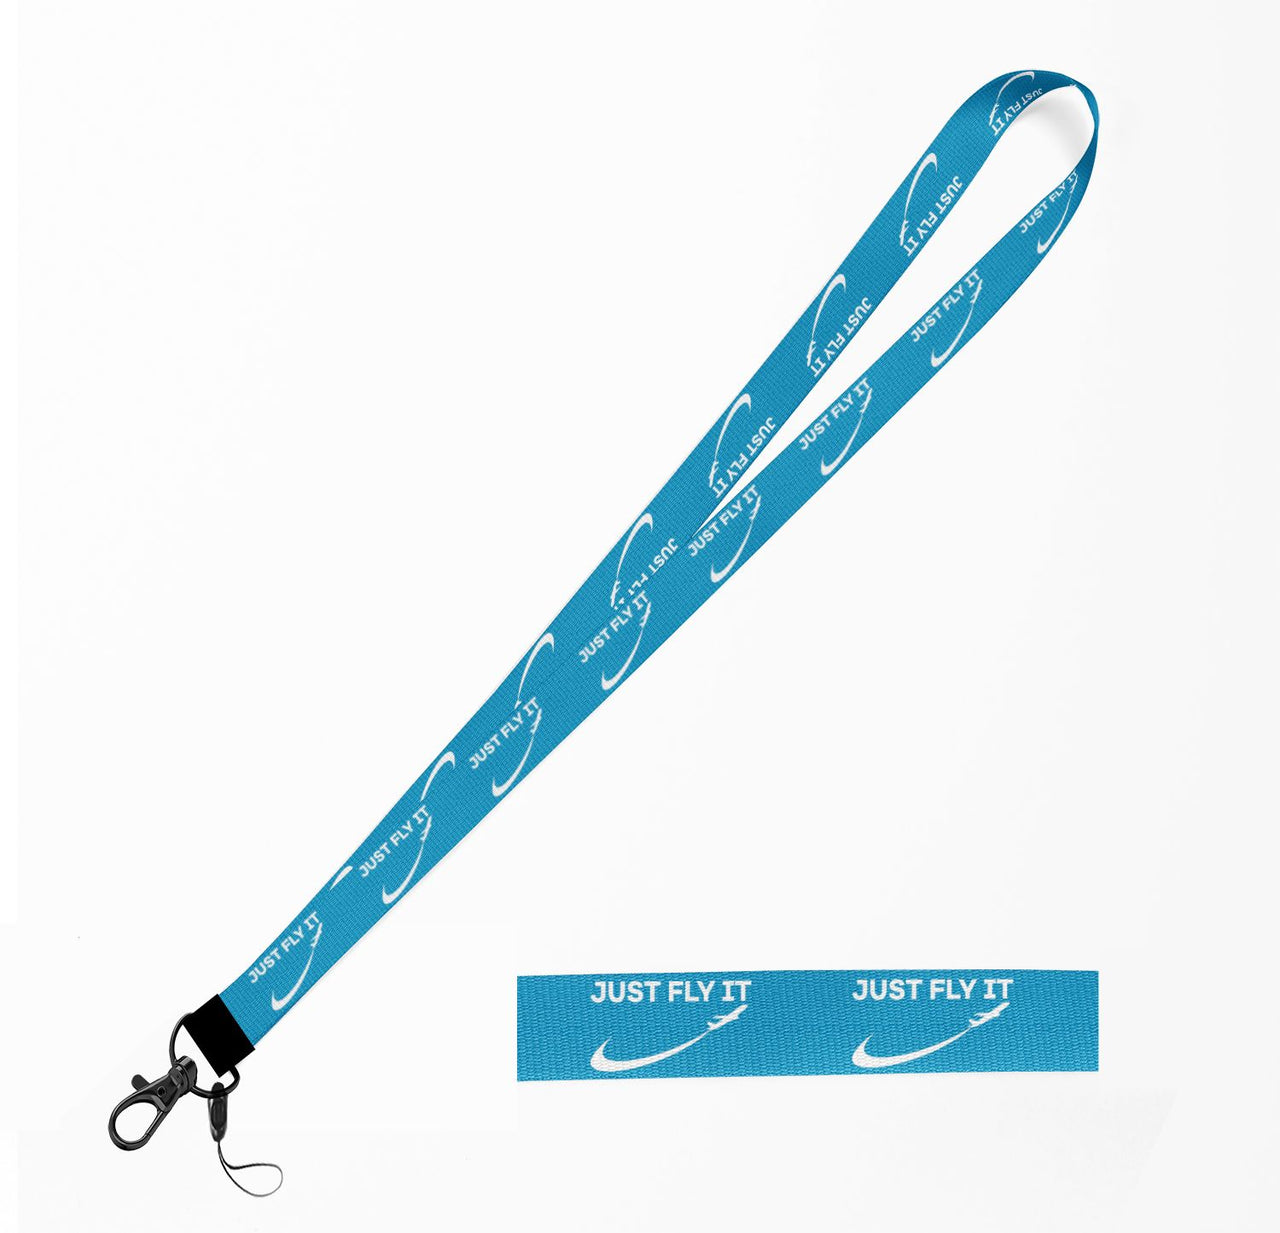 Just Fly It 2 Designed Lanyard & ID Holders